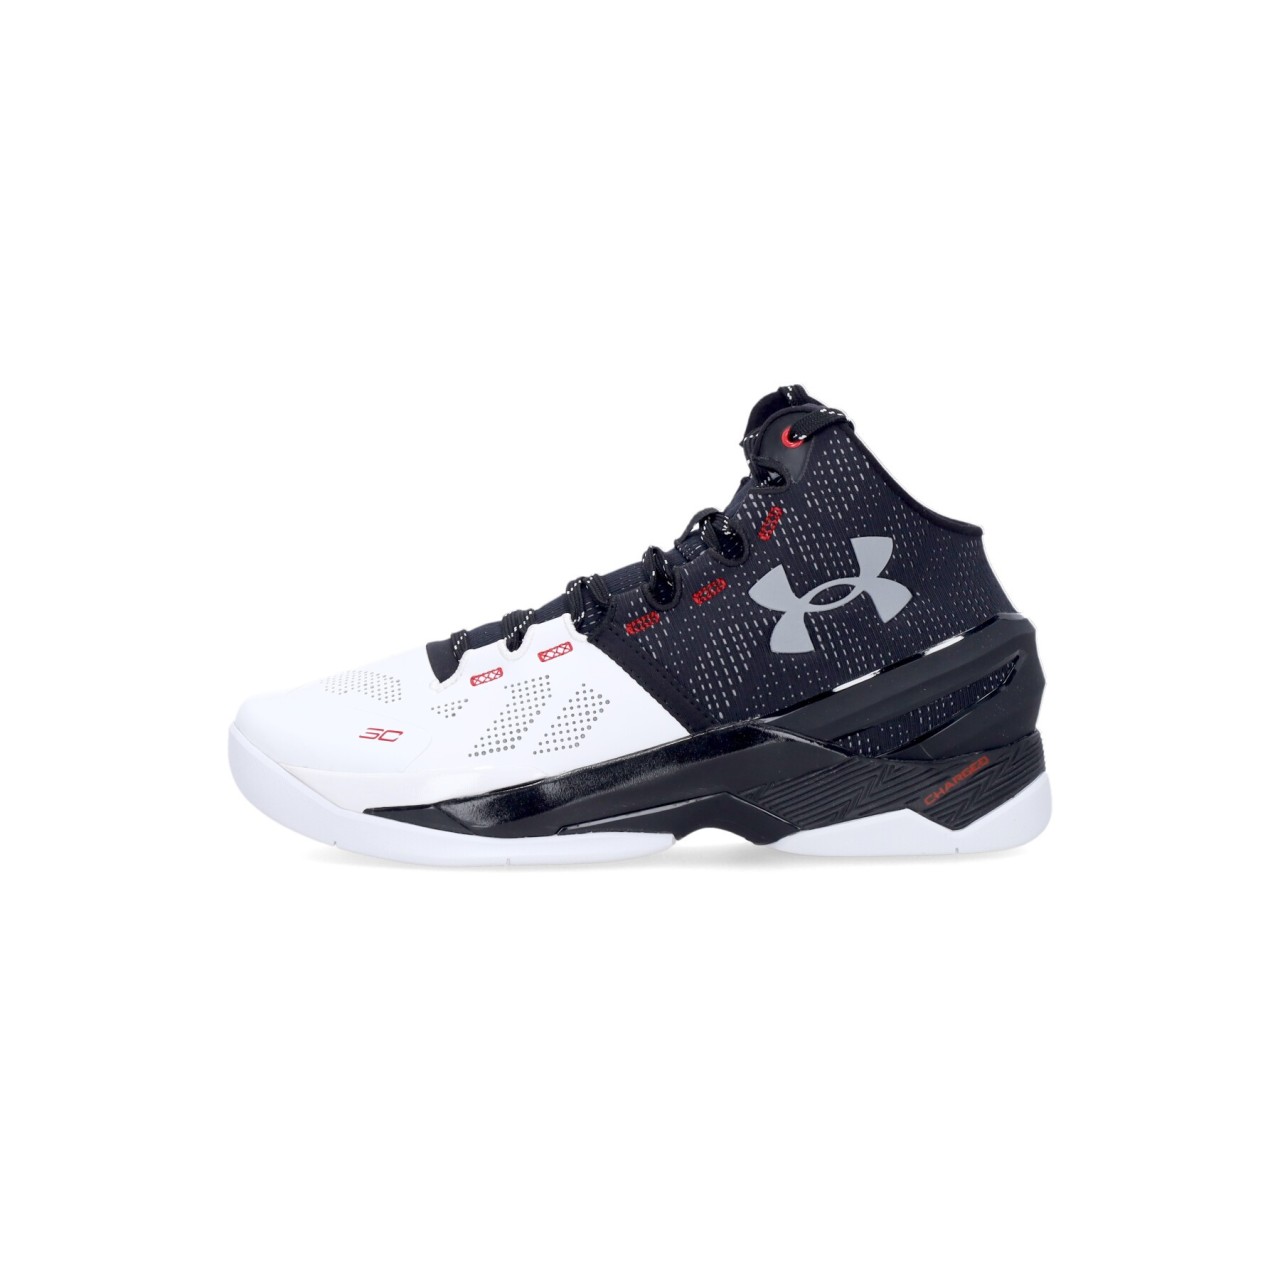 UNDER ARMOUR CURRY 2 NM 3027361-101